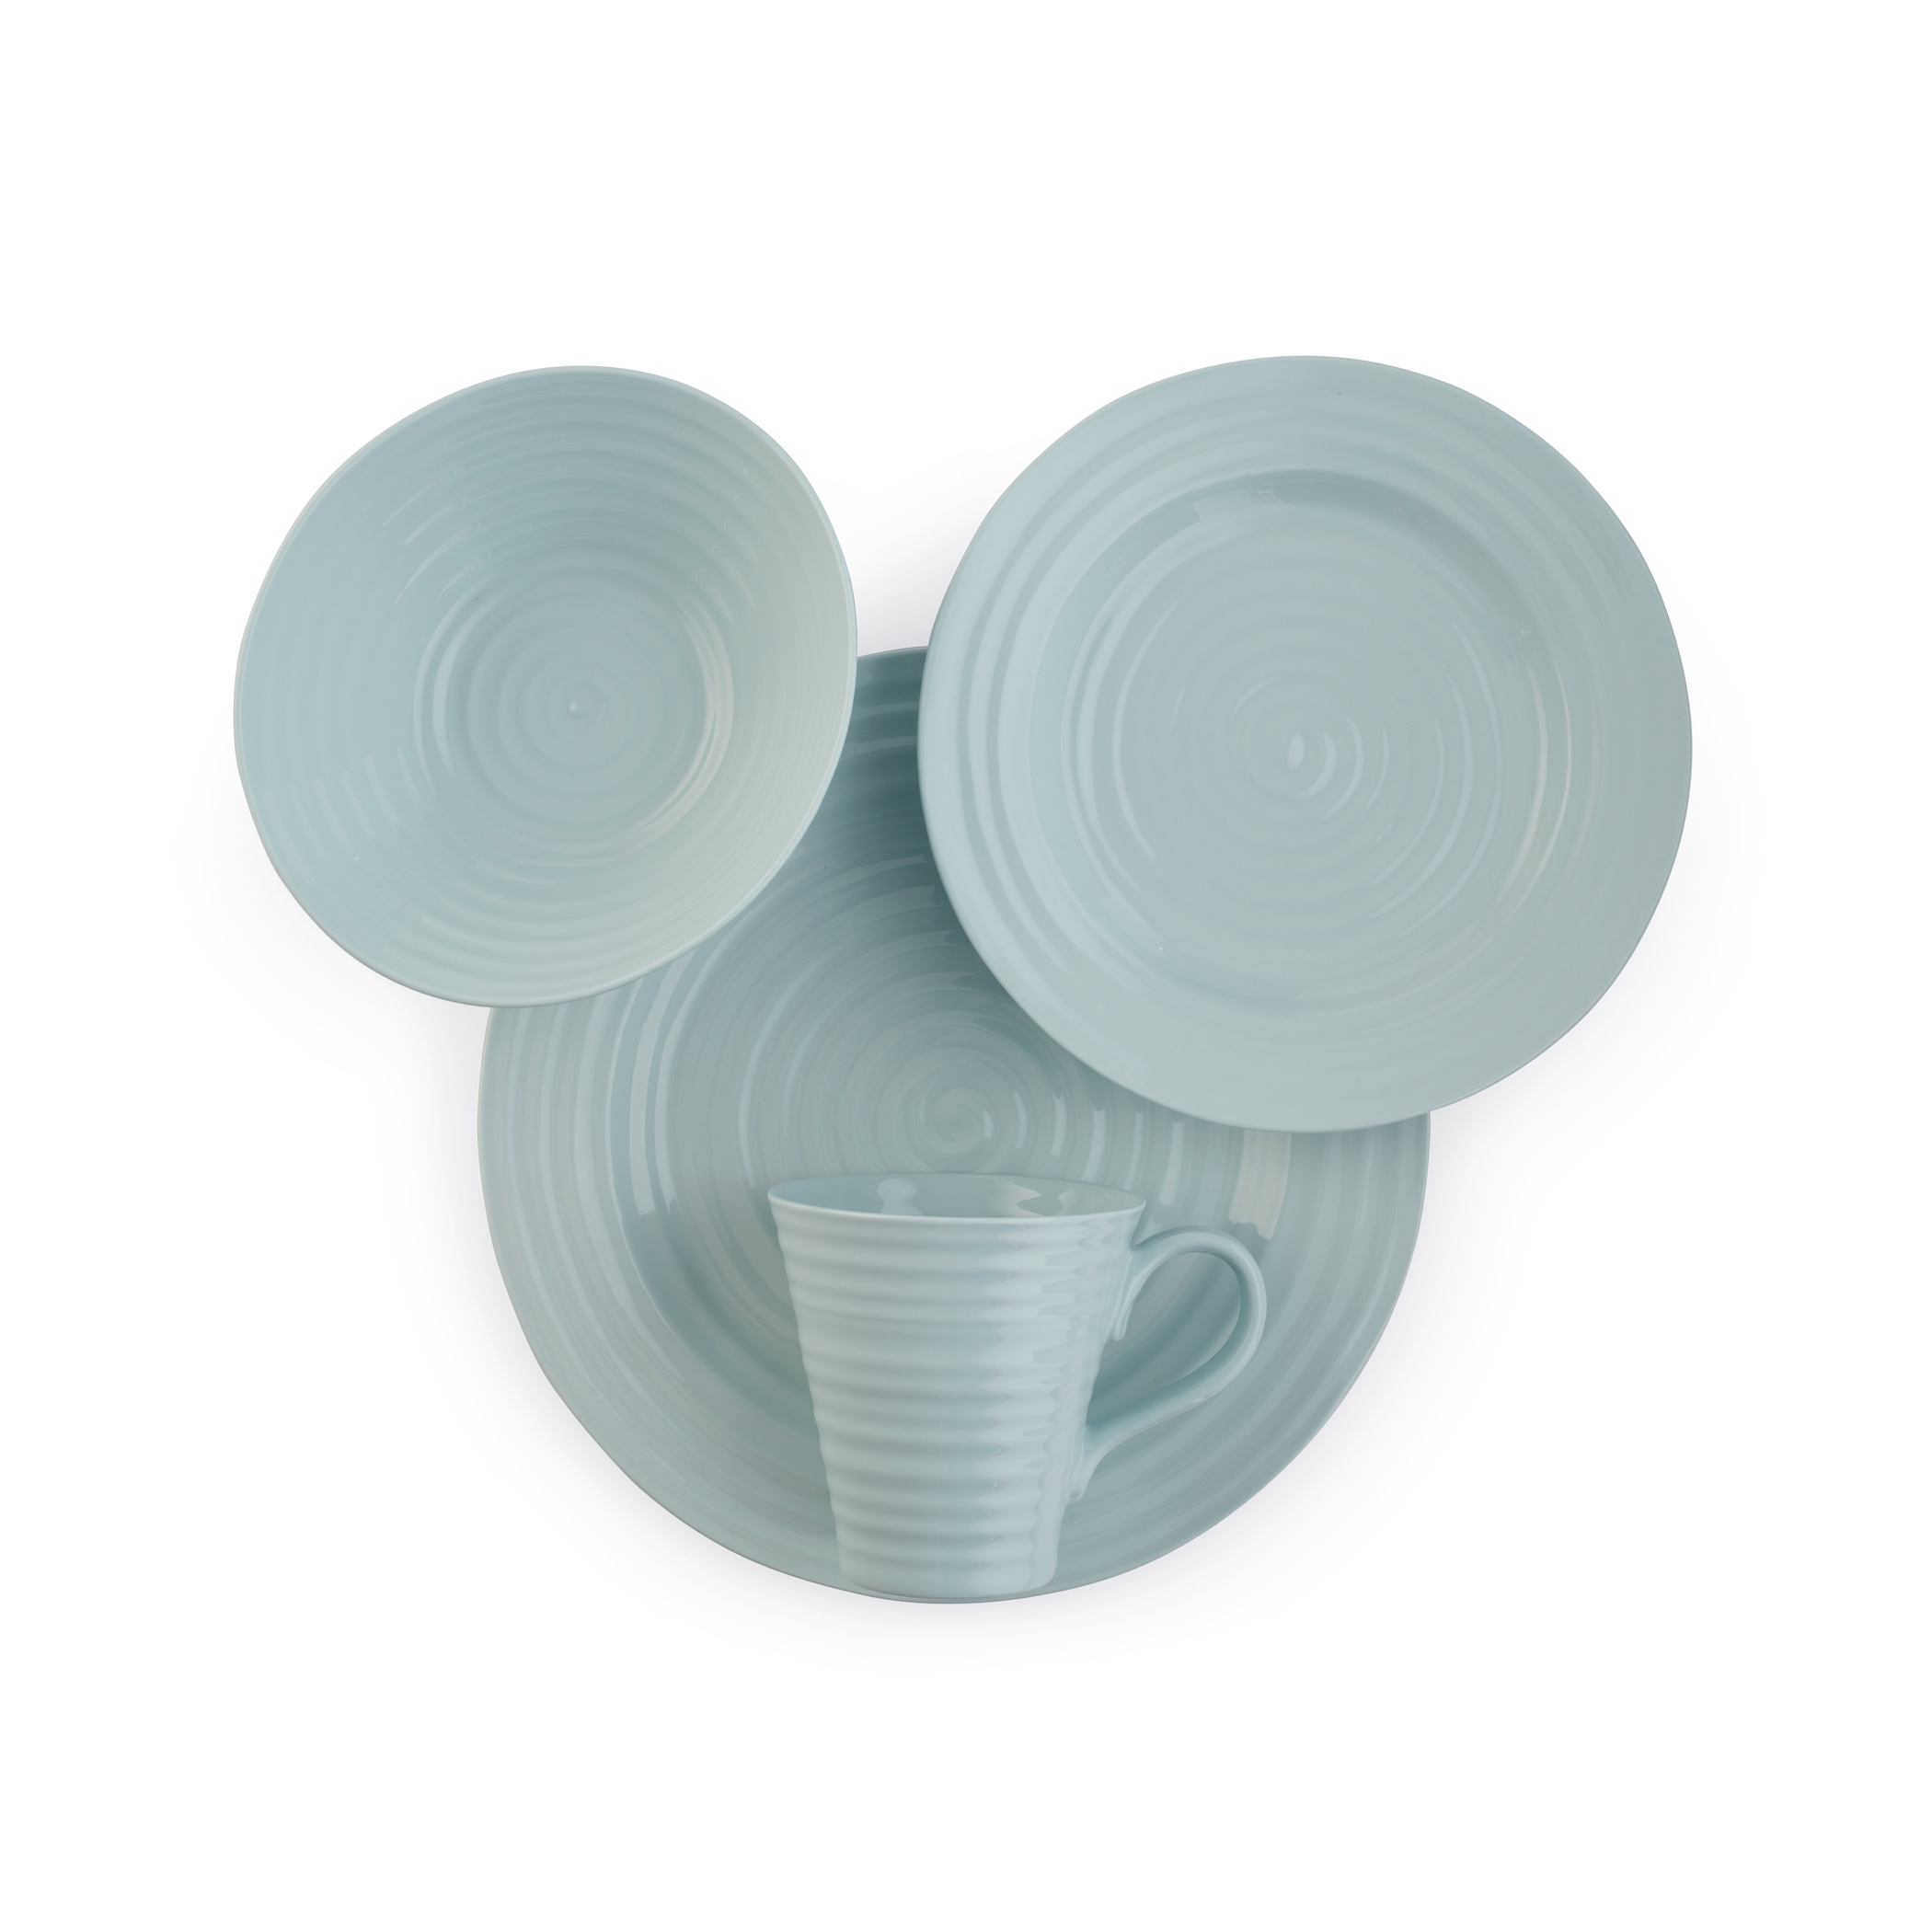 Sophie Conran Celadon 4-piece Place Setting image number null